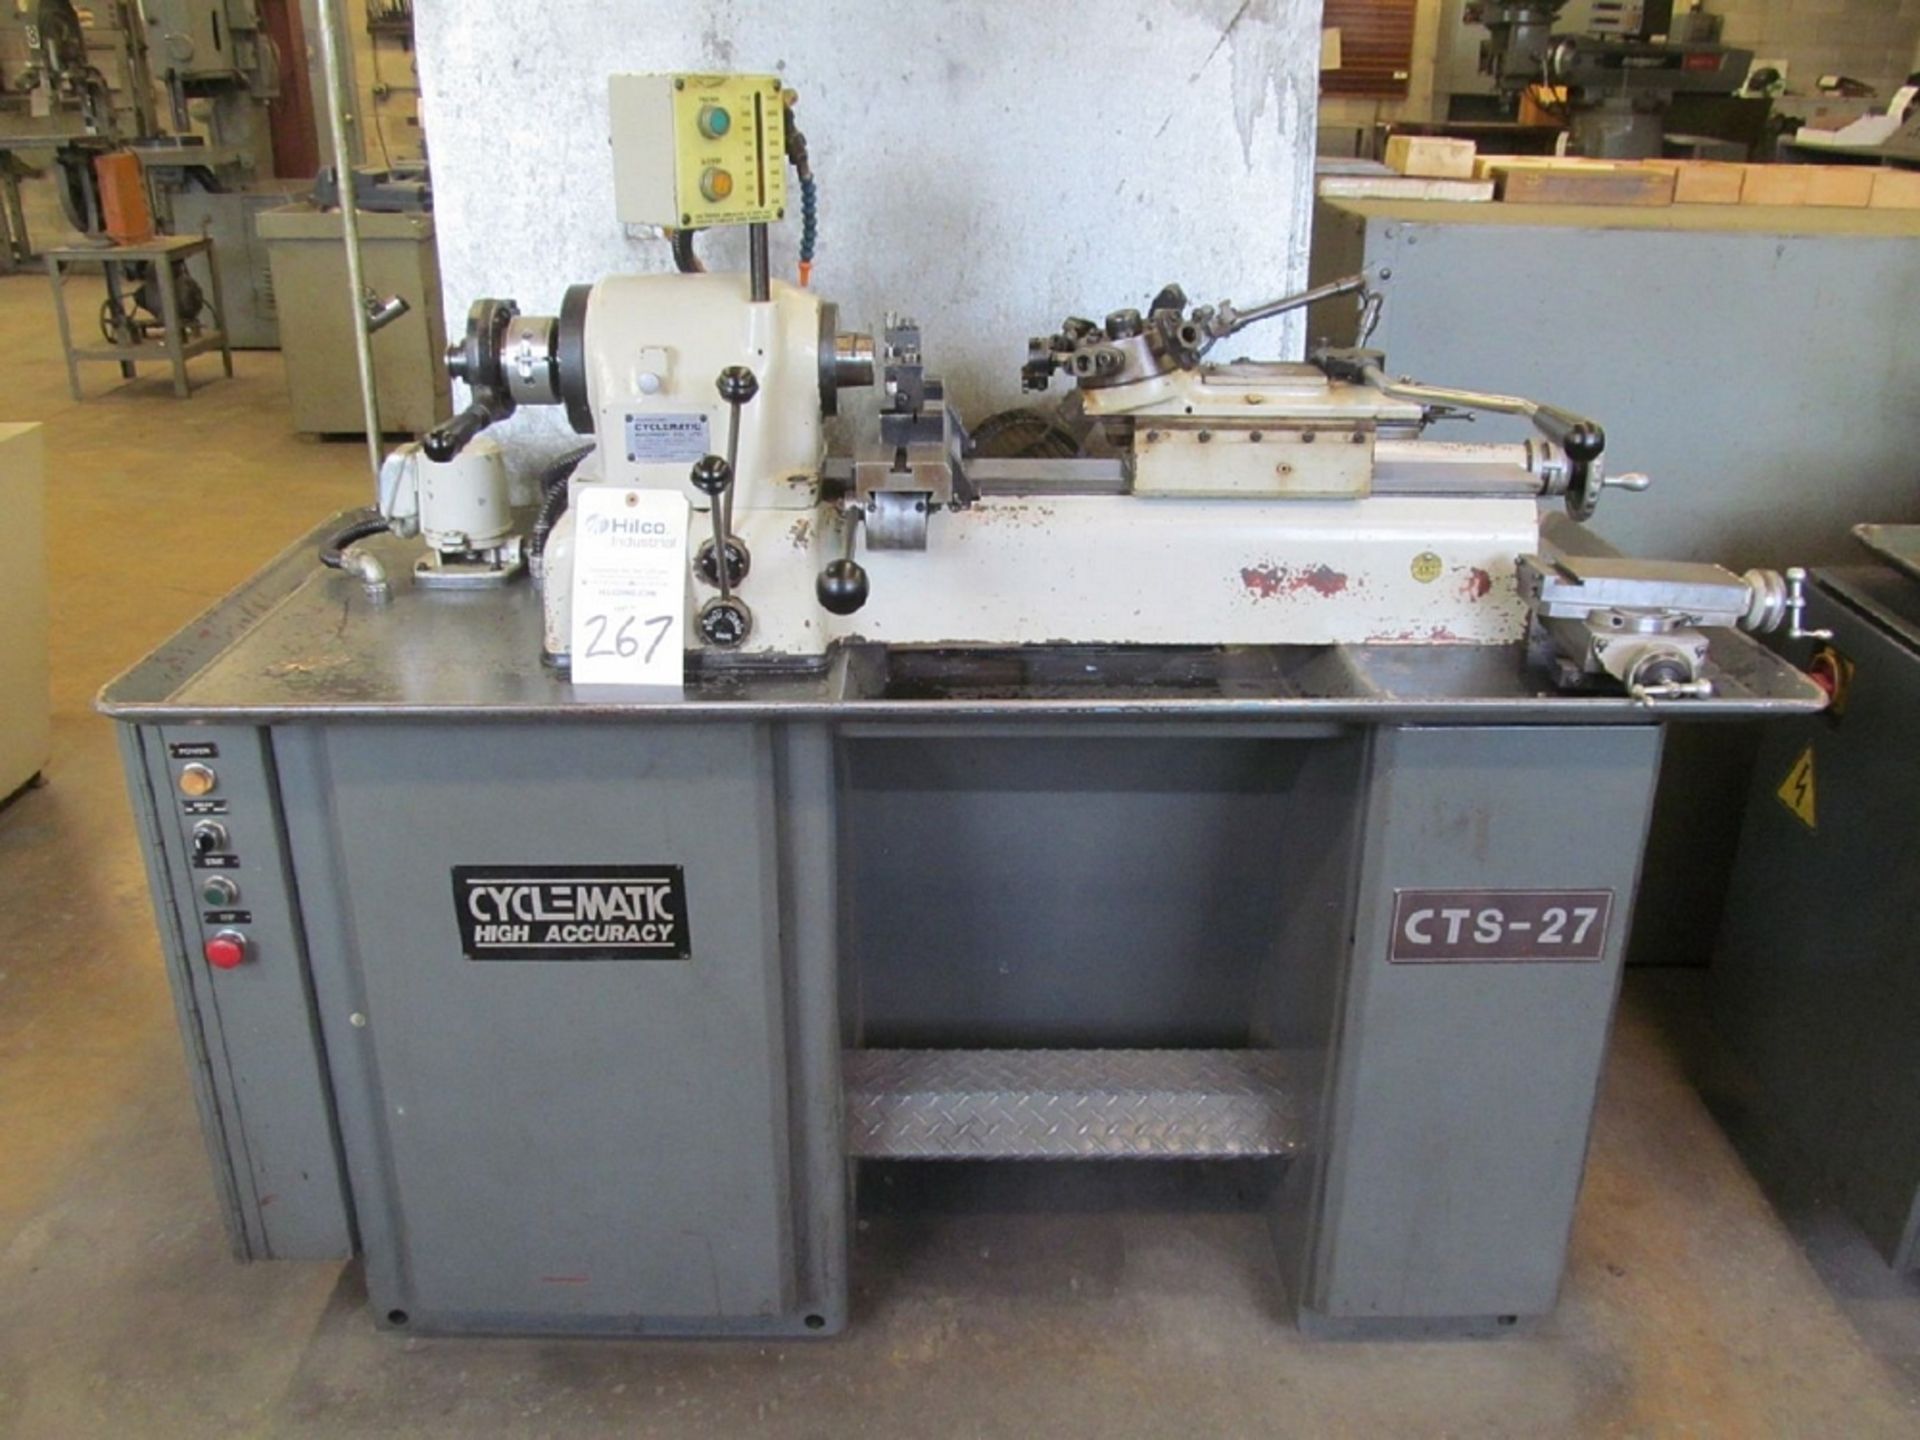 Cyclematic Model CTS-27 9" Tool Room Turret Lathe - Image 4 of 4